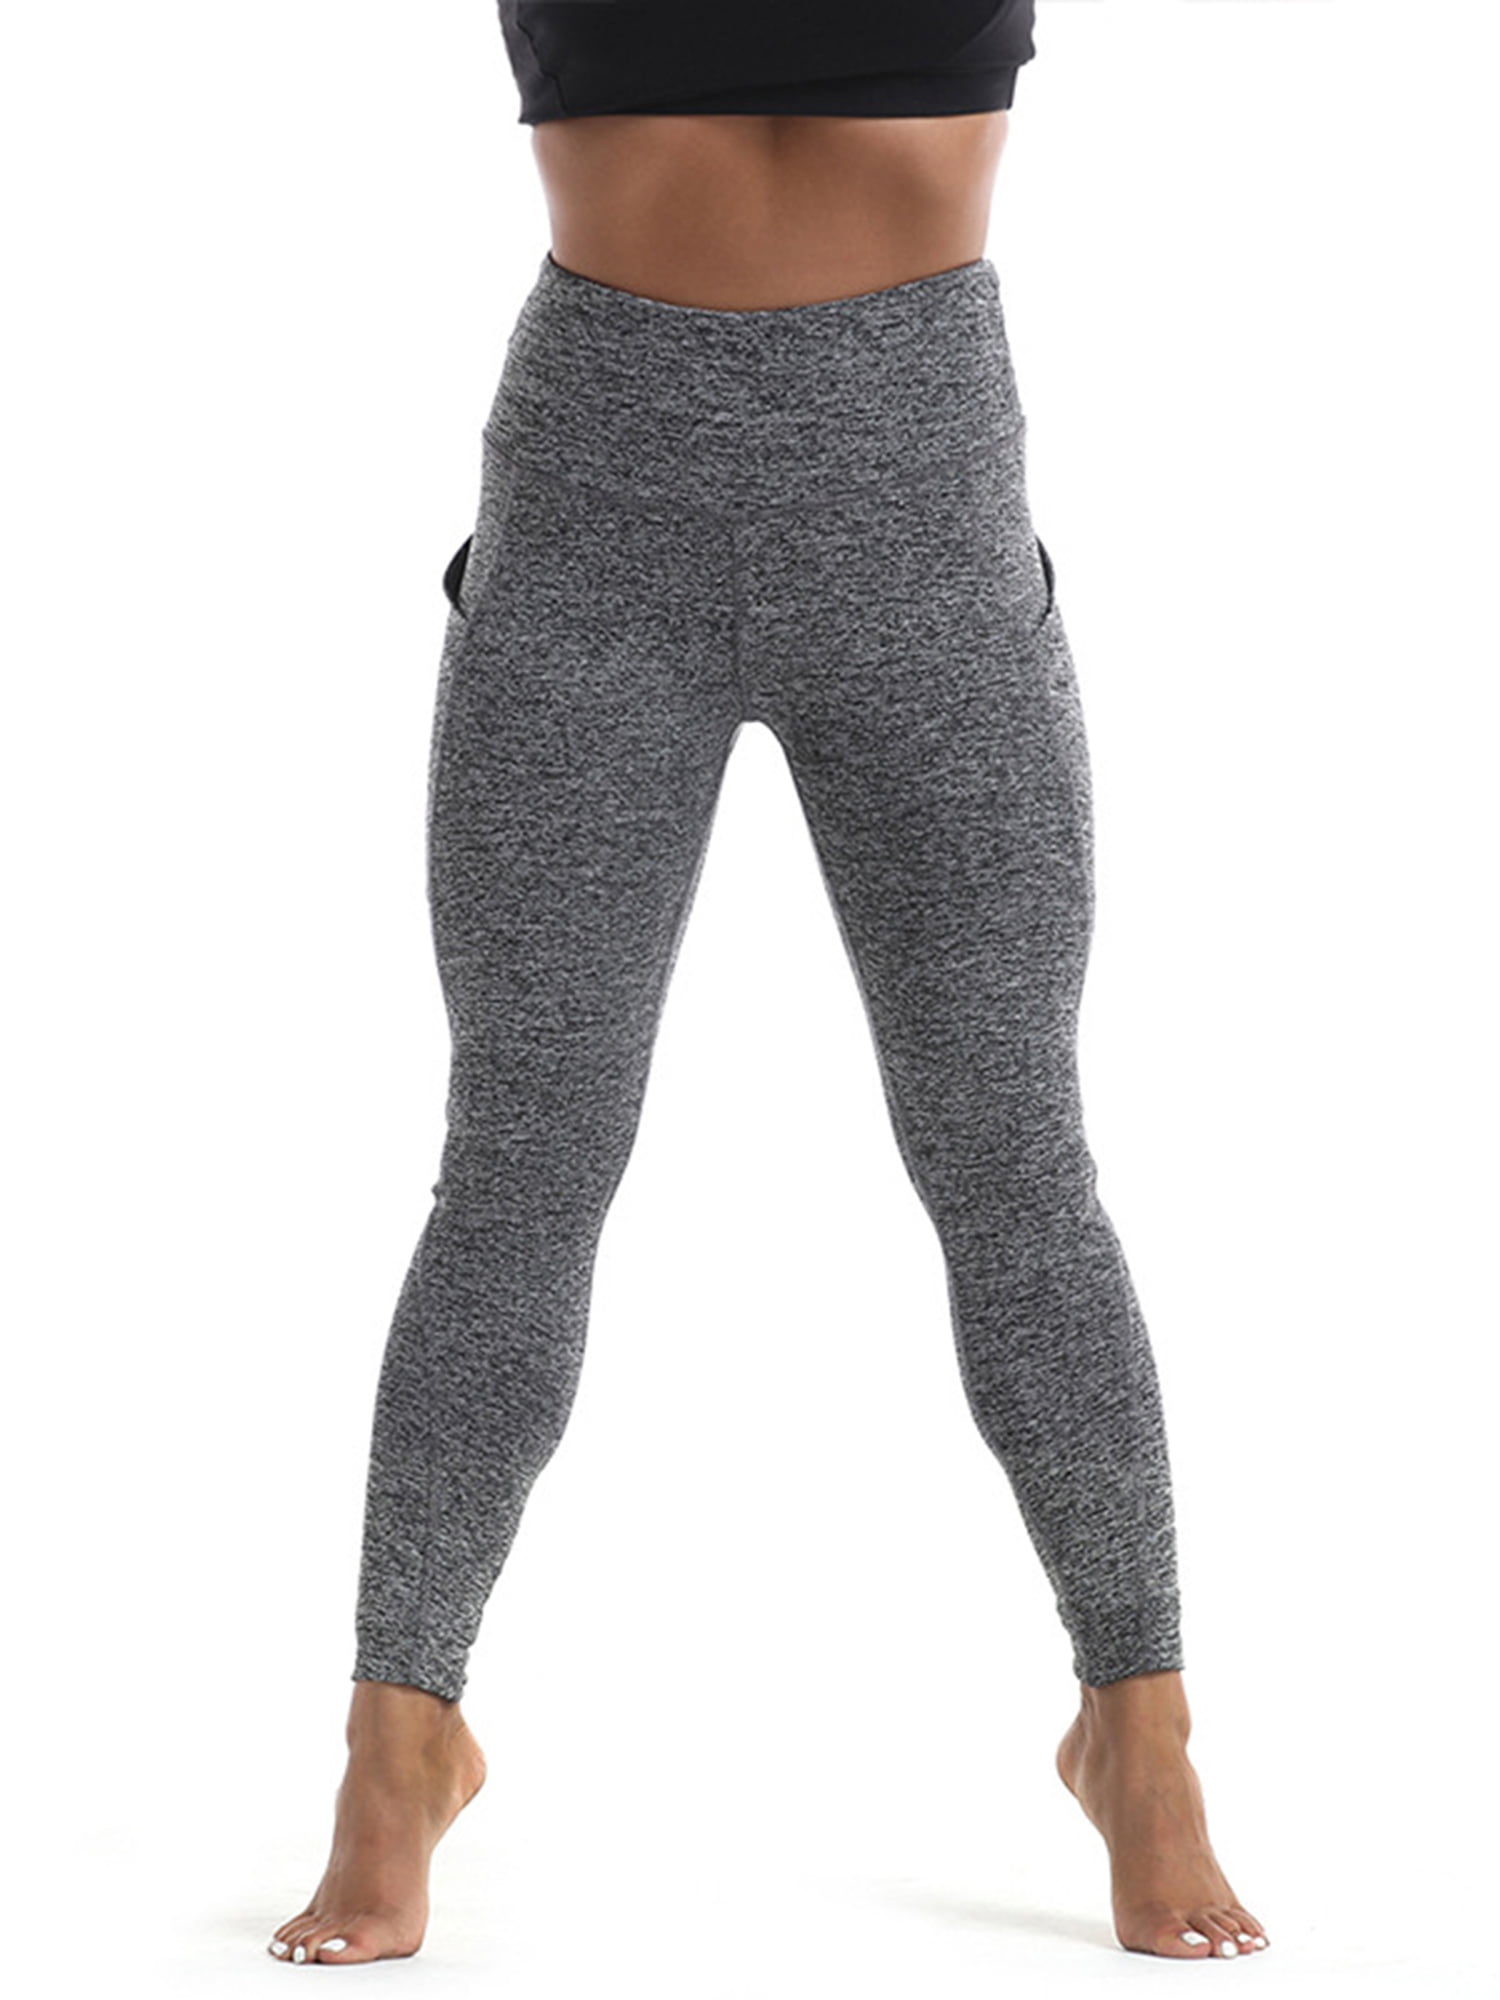 Details about   Womens Yoga Pants Gym Leggings Ladies Sportswear Gym Running Fitness Trousers 